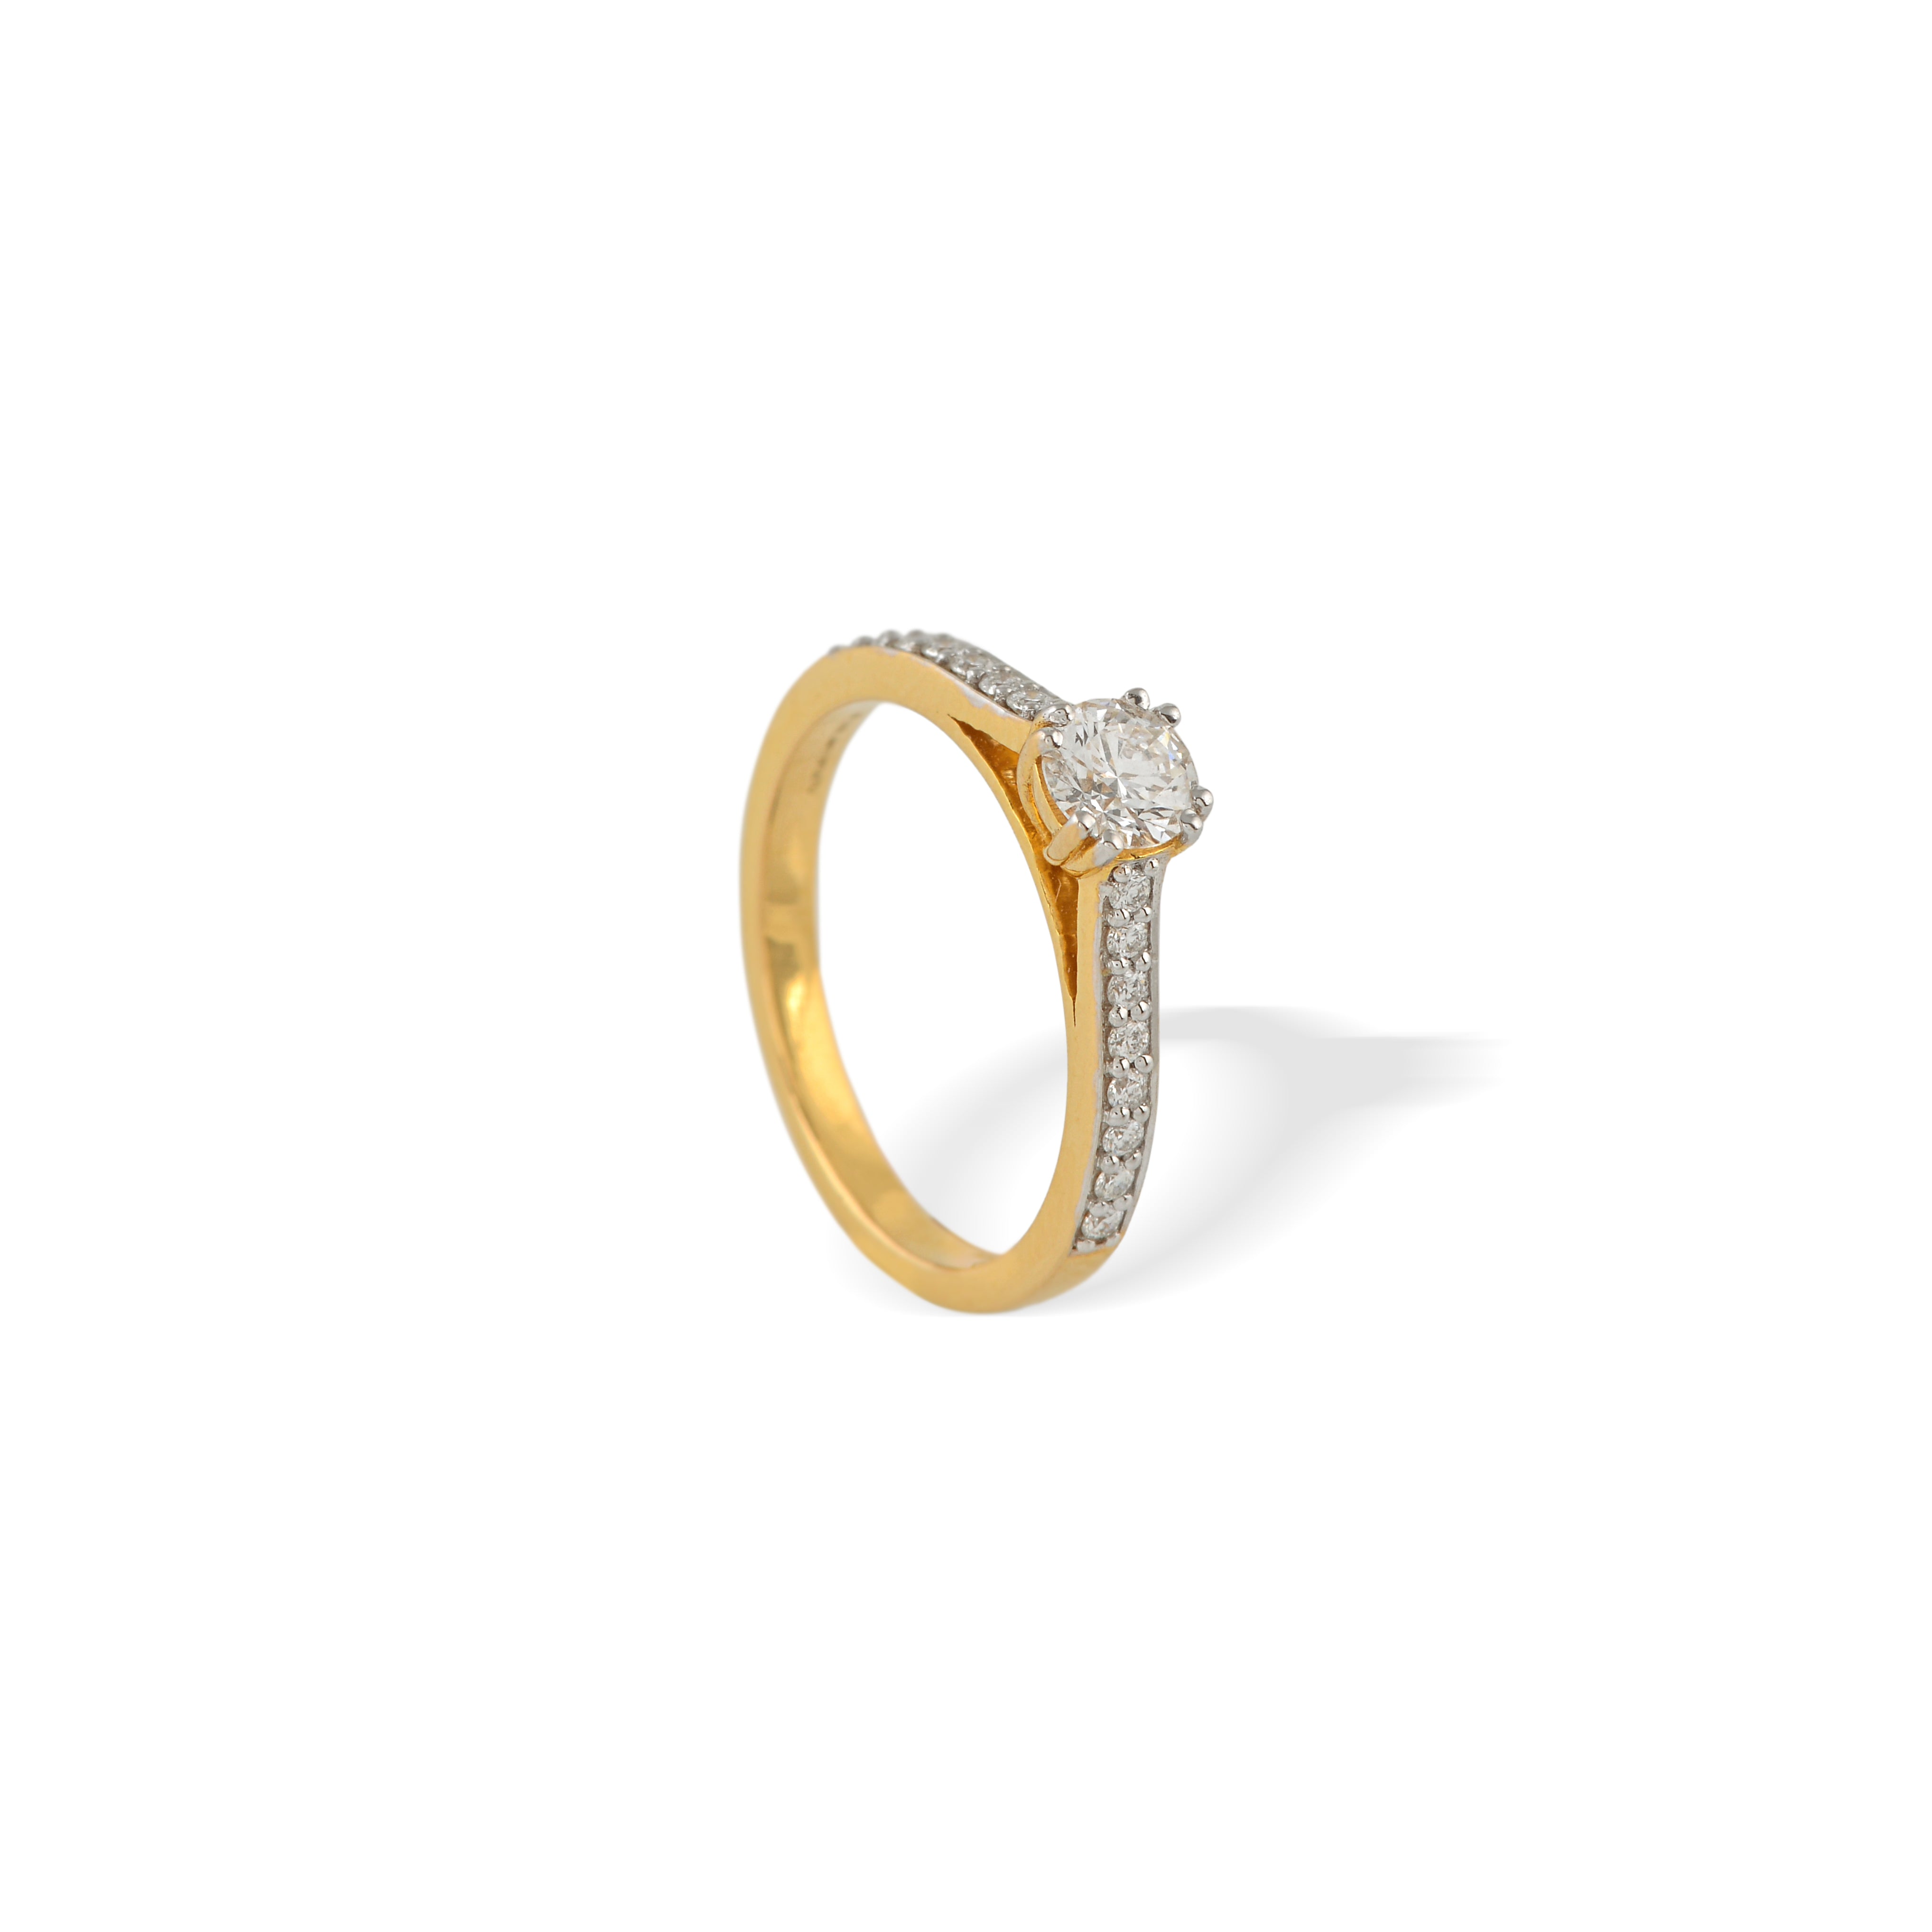 Dual Tone Radiance 18 Kt White and Yellow Gold Diamond Ring - TBZ & Sons